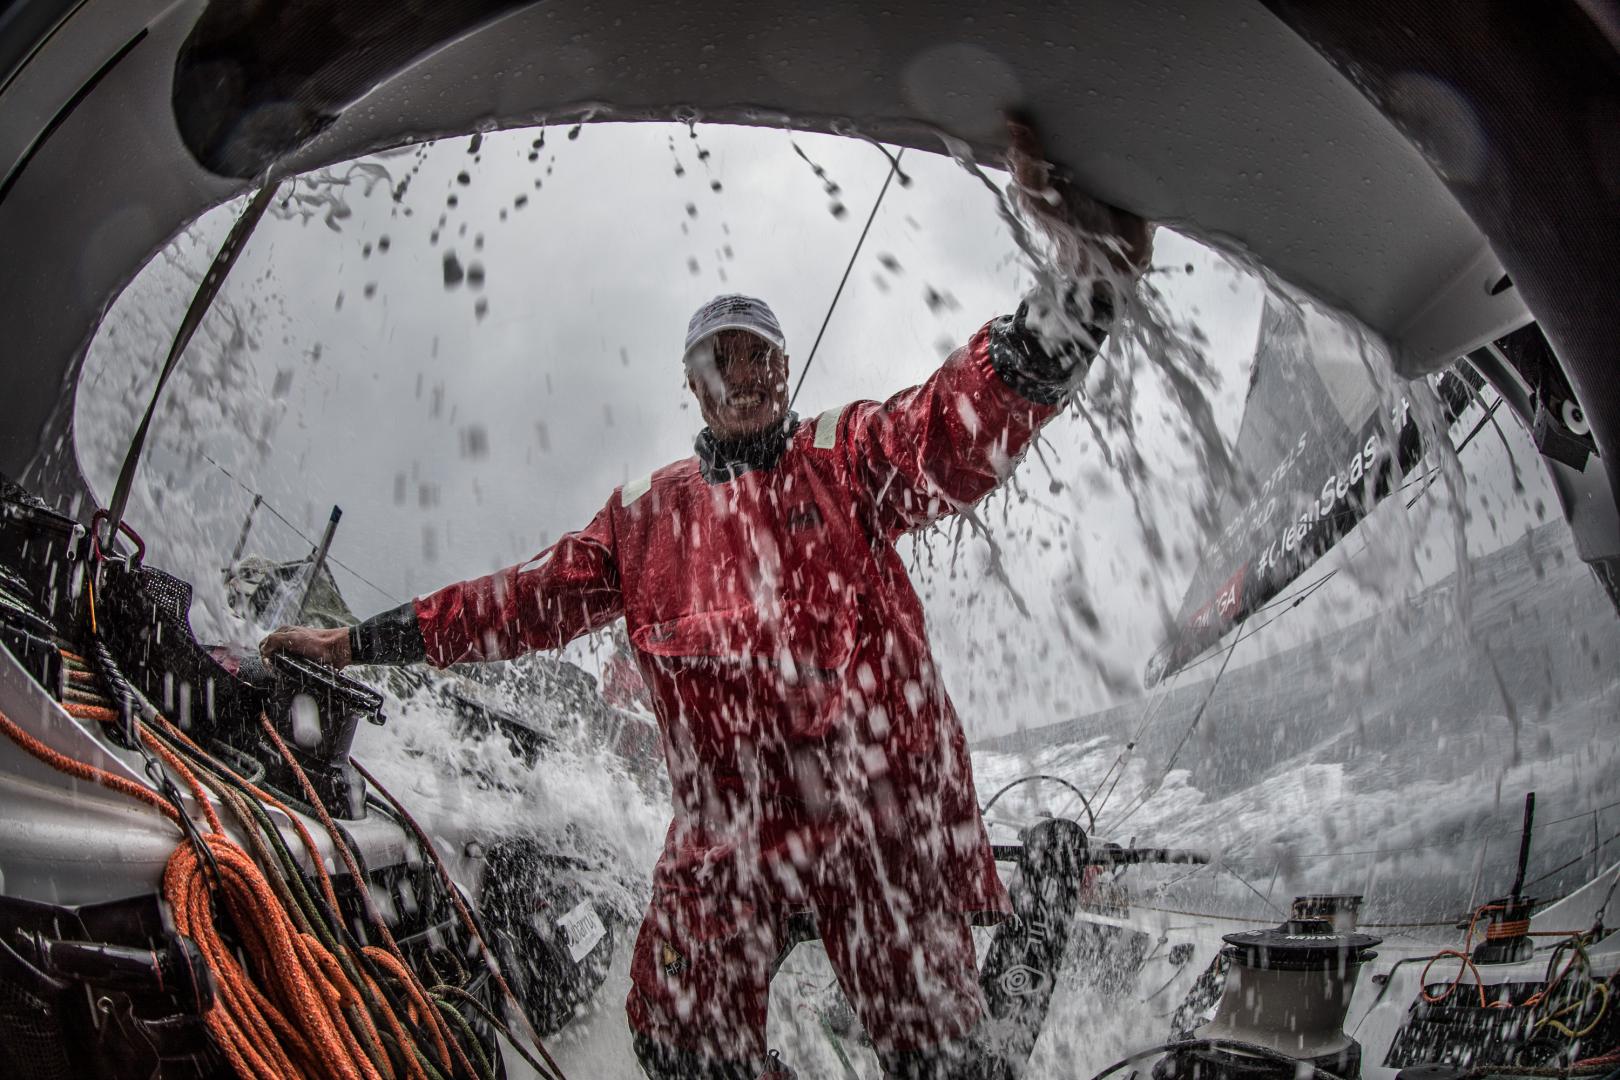 Leg 4, Melbourne to Hong Kong, day 18 Trystan Seal out in the thick of it on board Sun Hung Kai/Scallywag. Photo by Konrad Frost/Volvo Ocean Race.